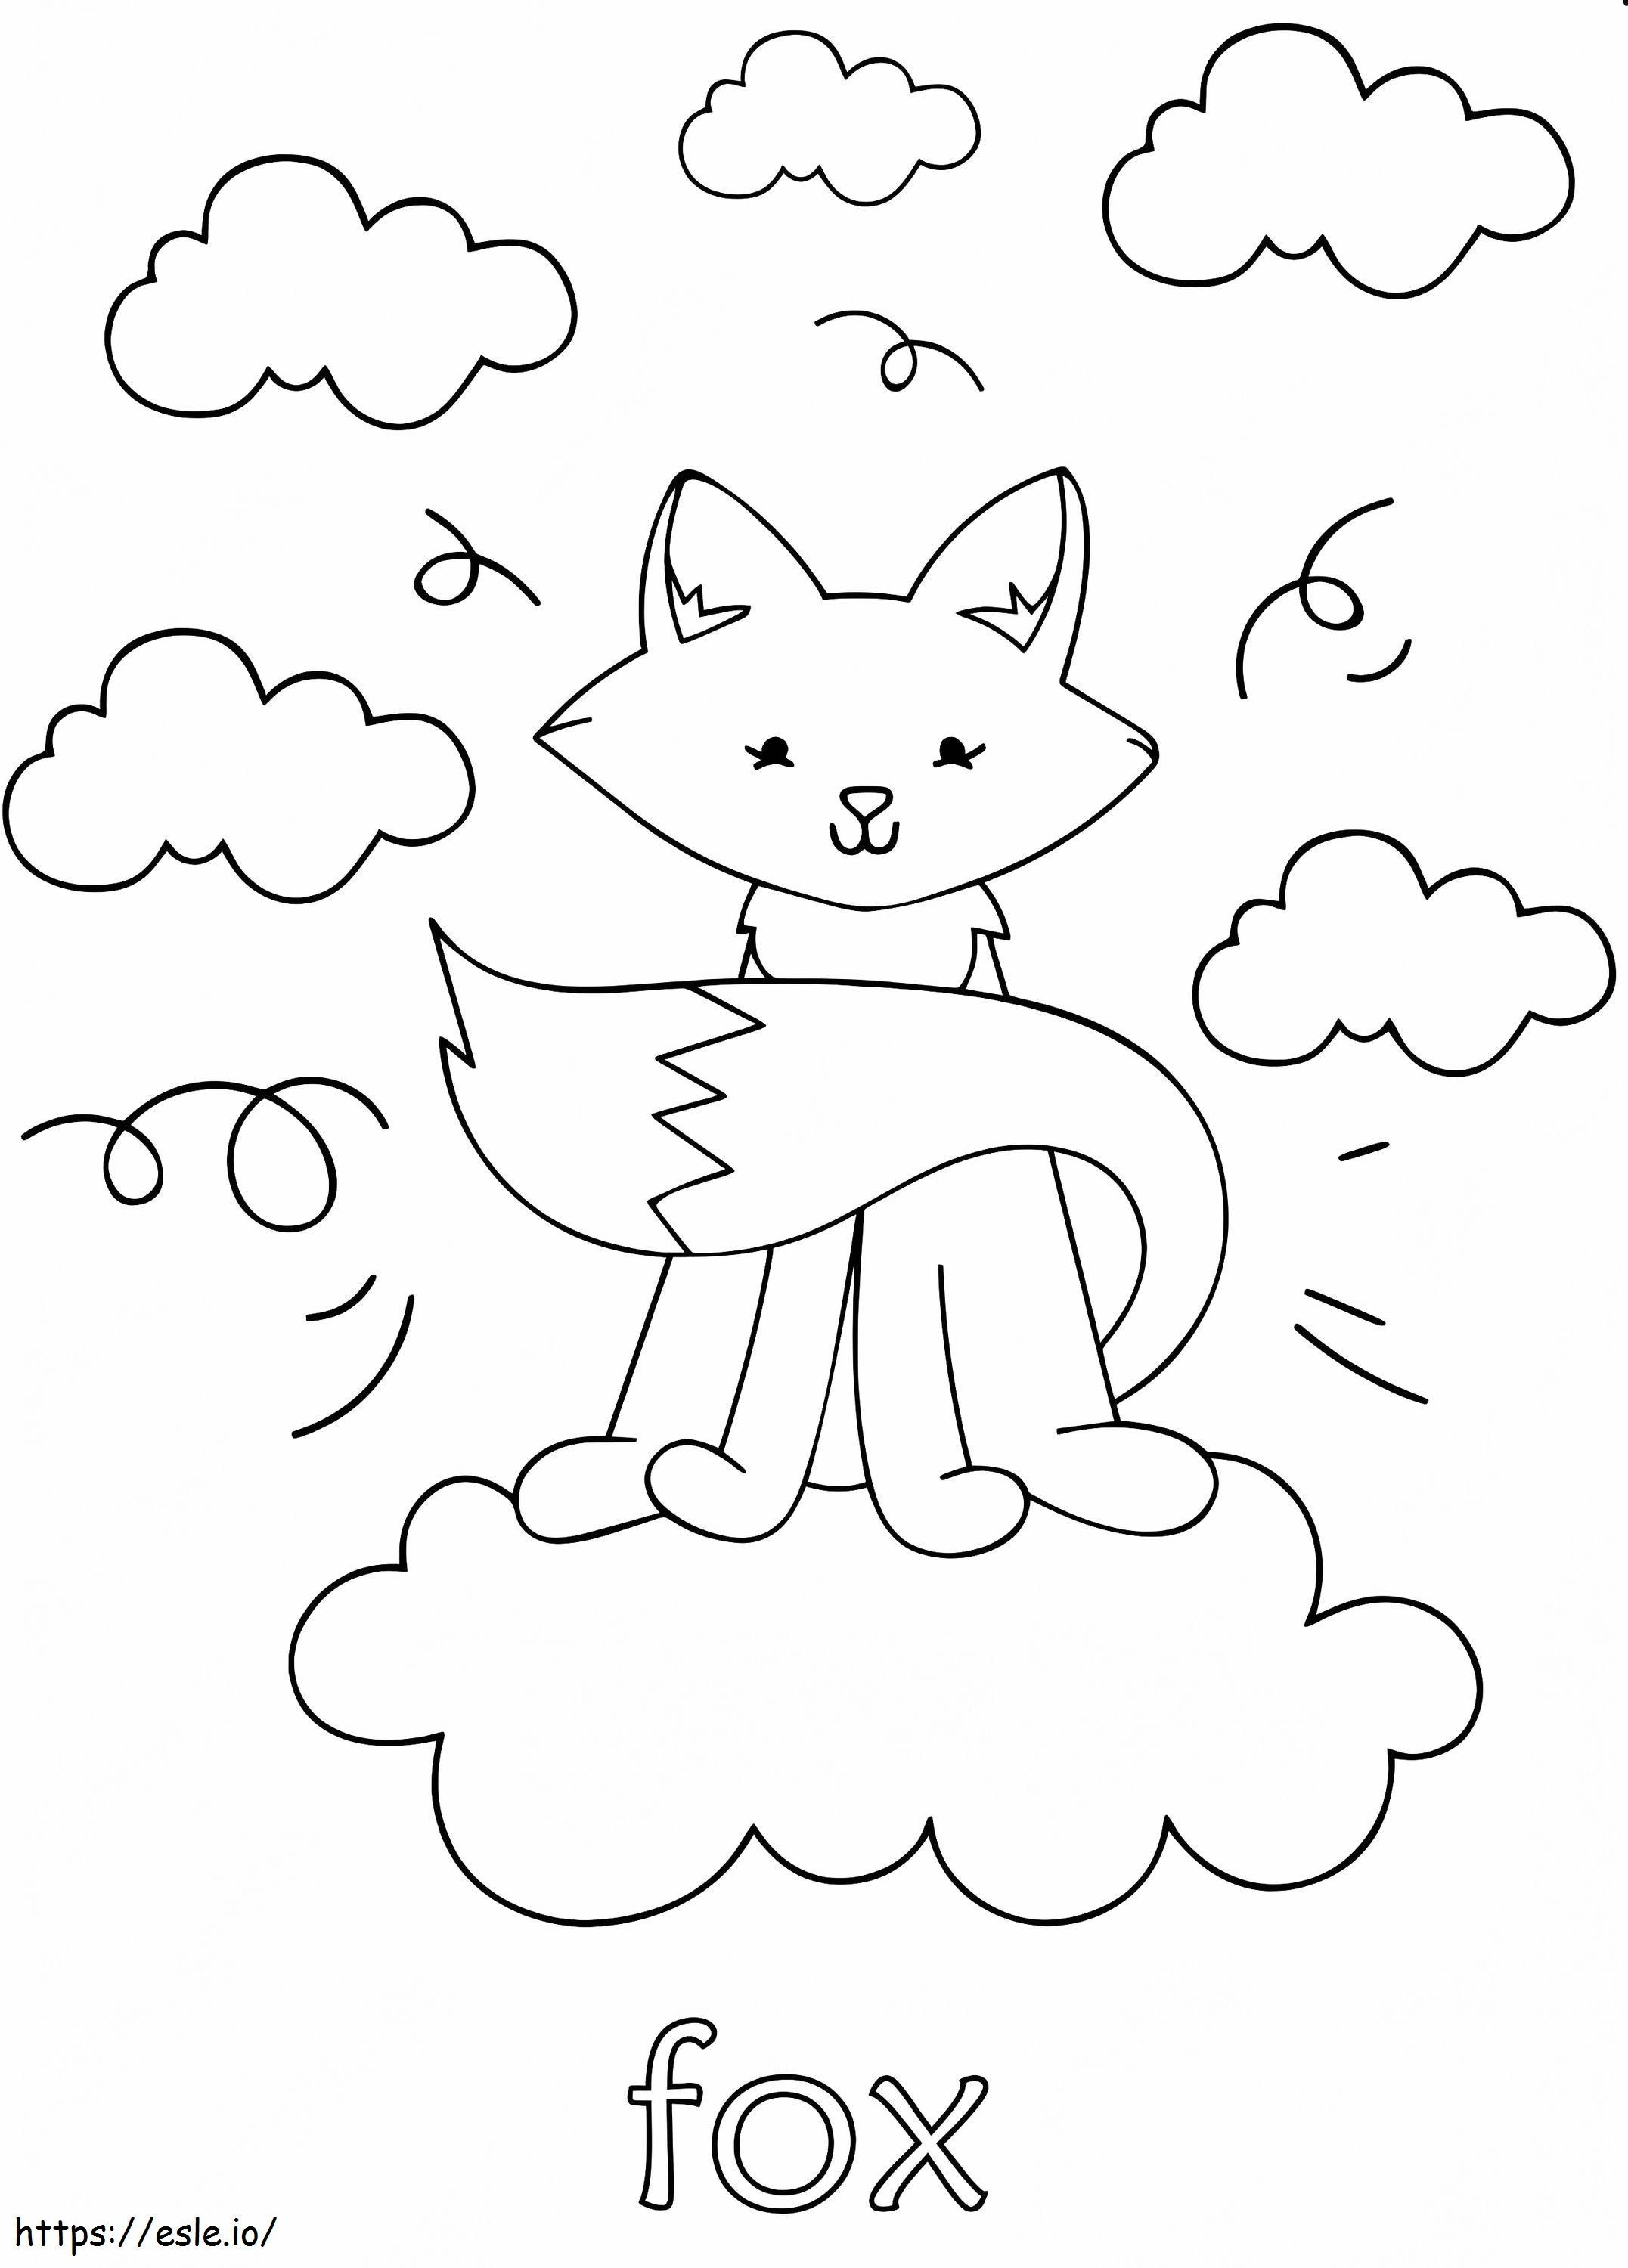 Cute Fox In Sky coloring page